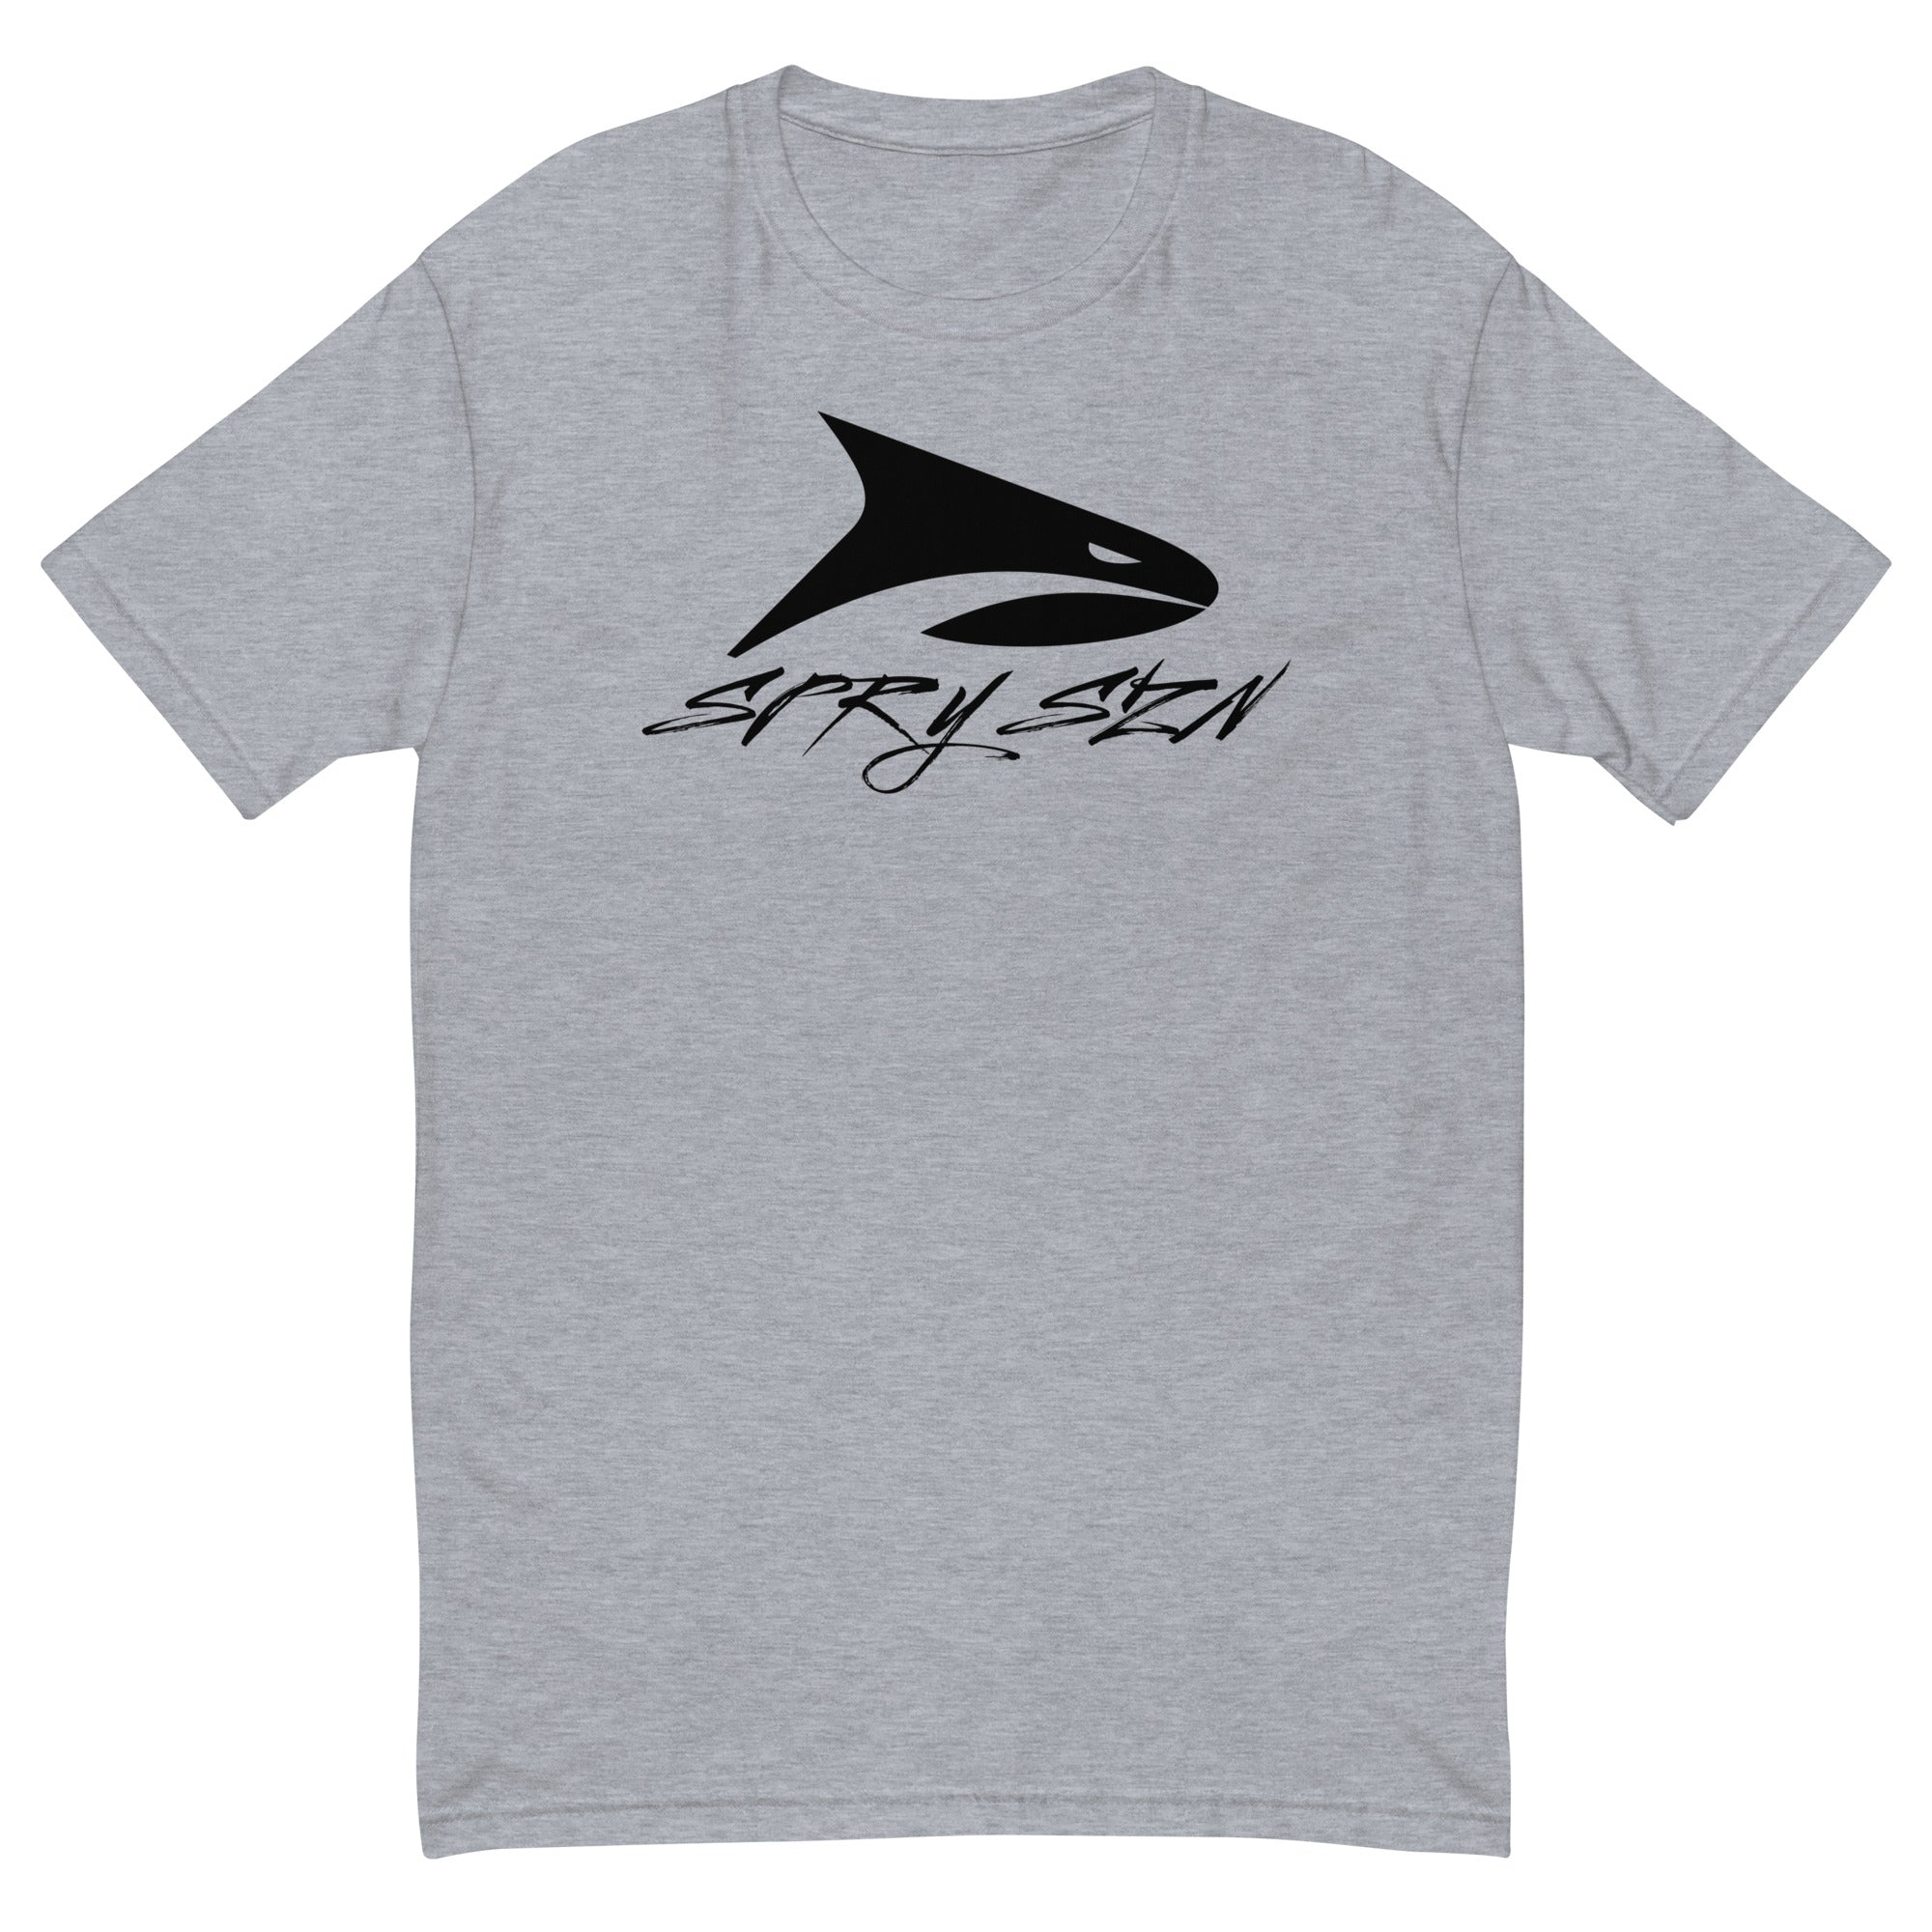 SPRY SZN Black Shark Fitted T-Shirt